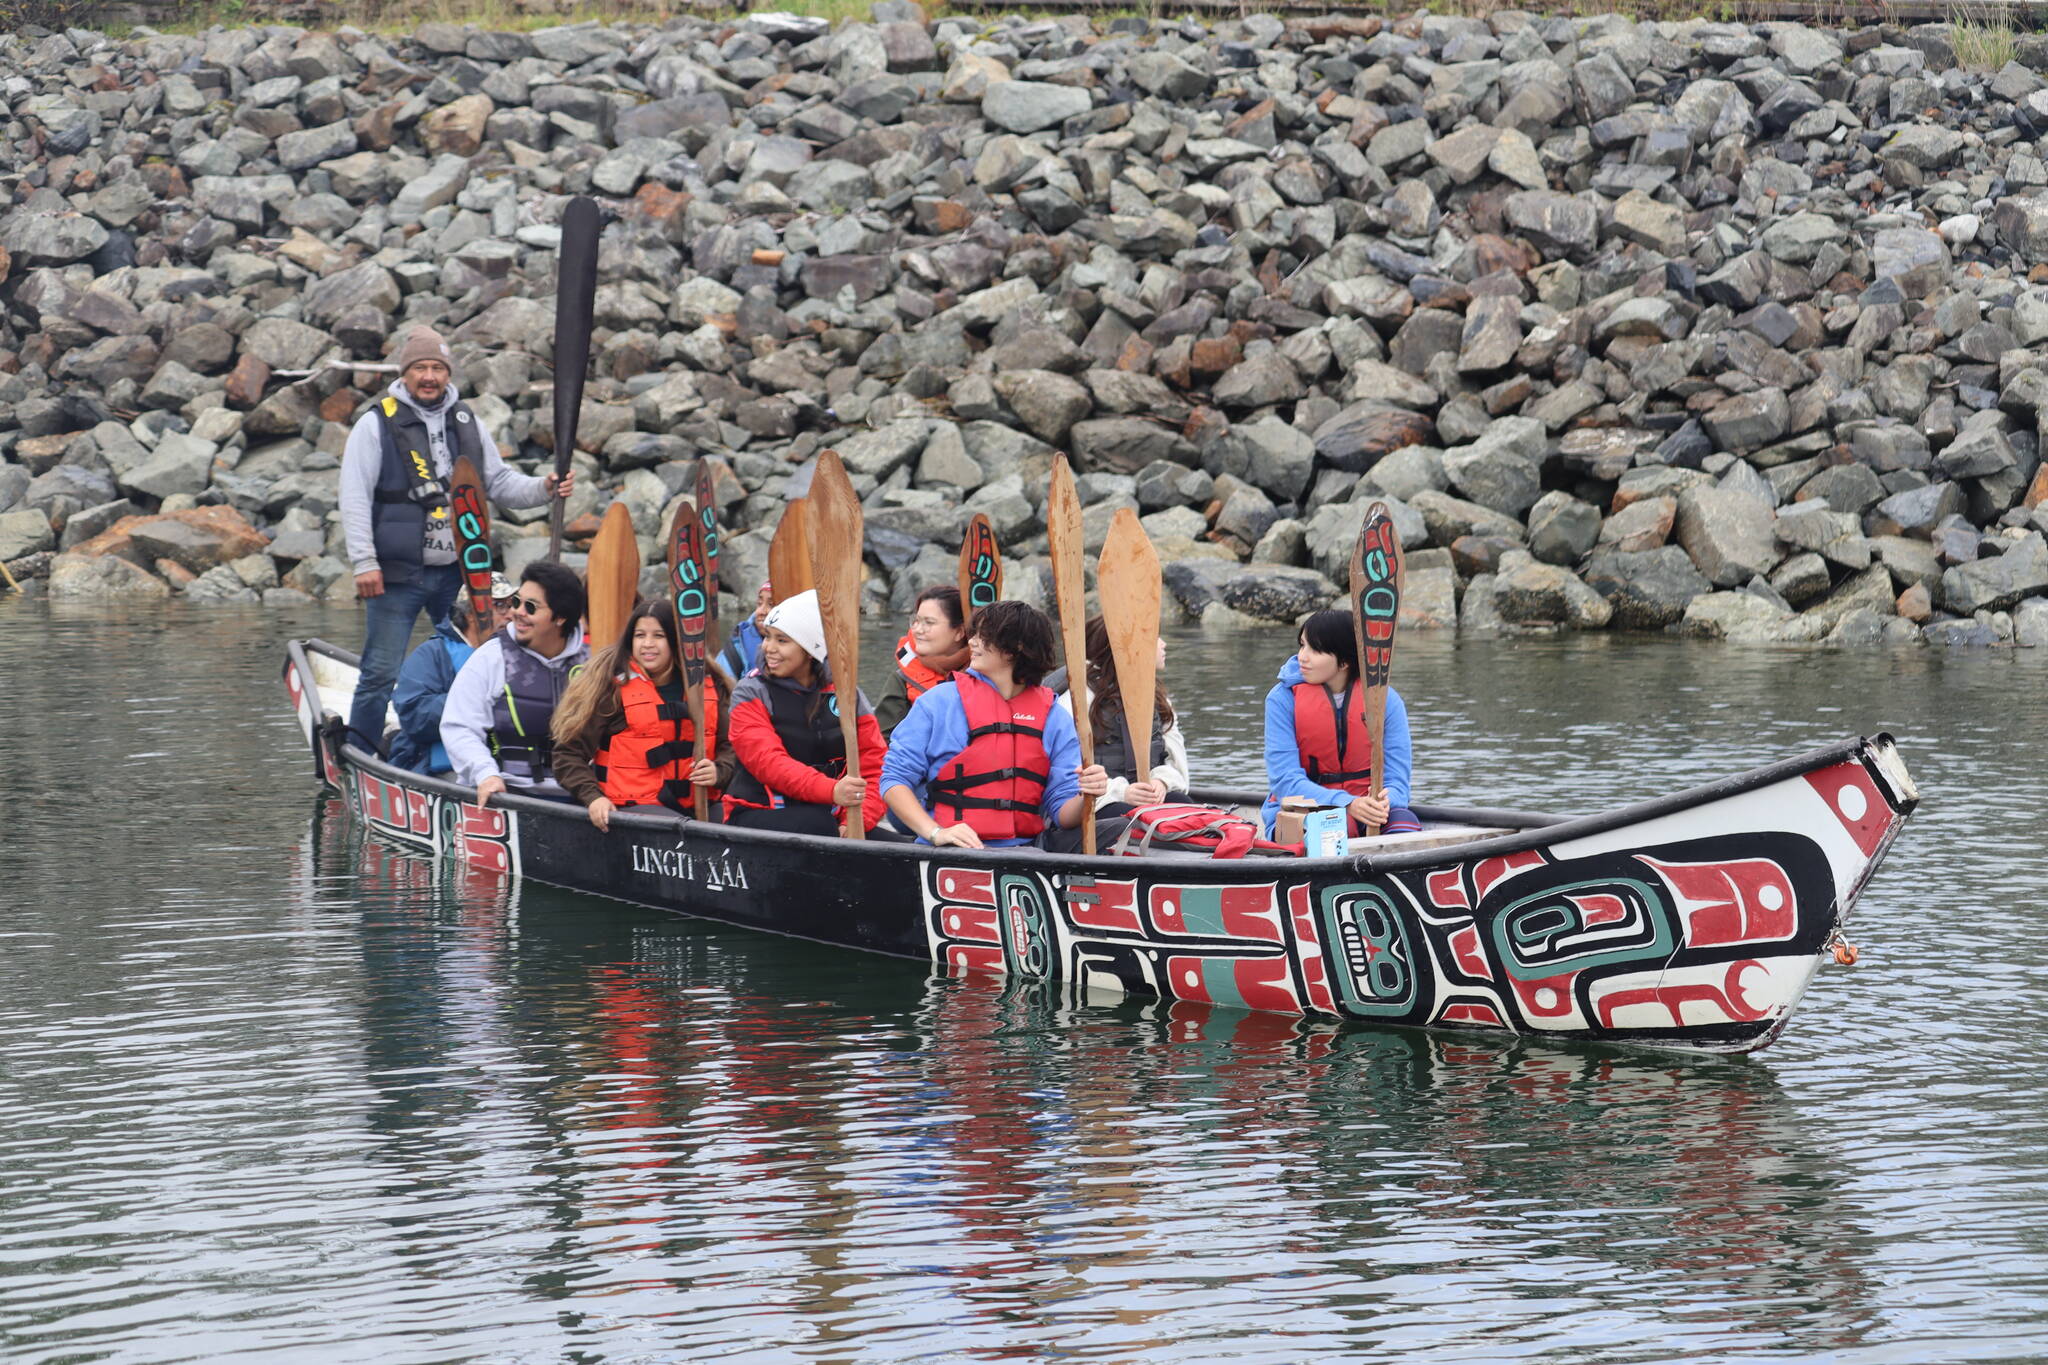 Jonson Kuhn / Juneau Empire 
A two-hour Canoe Healing-Journeys was offered for suicide loss and attempt survivors in recognition of International Suicide Prevention Awareness Day, hosted by Juneau Suicide Prevention Coalition and partners on Saturday at Sandy Beach.